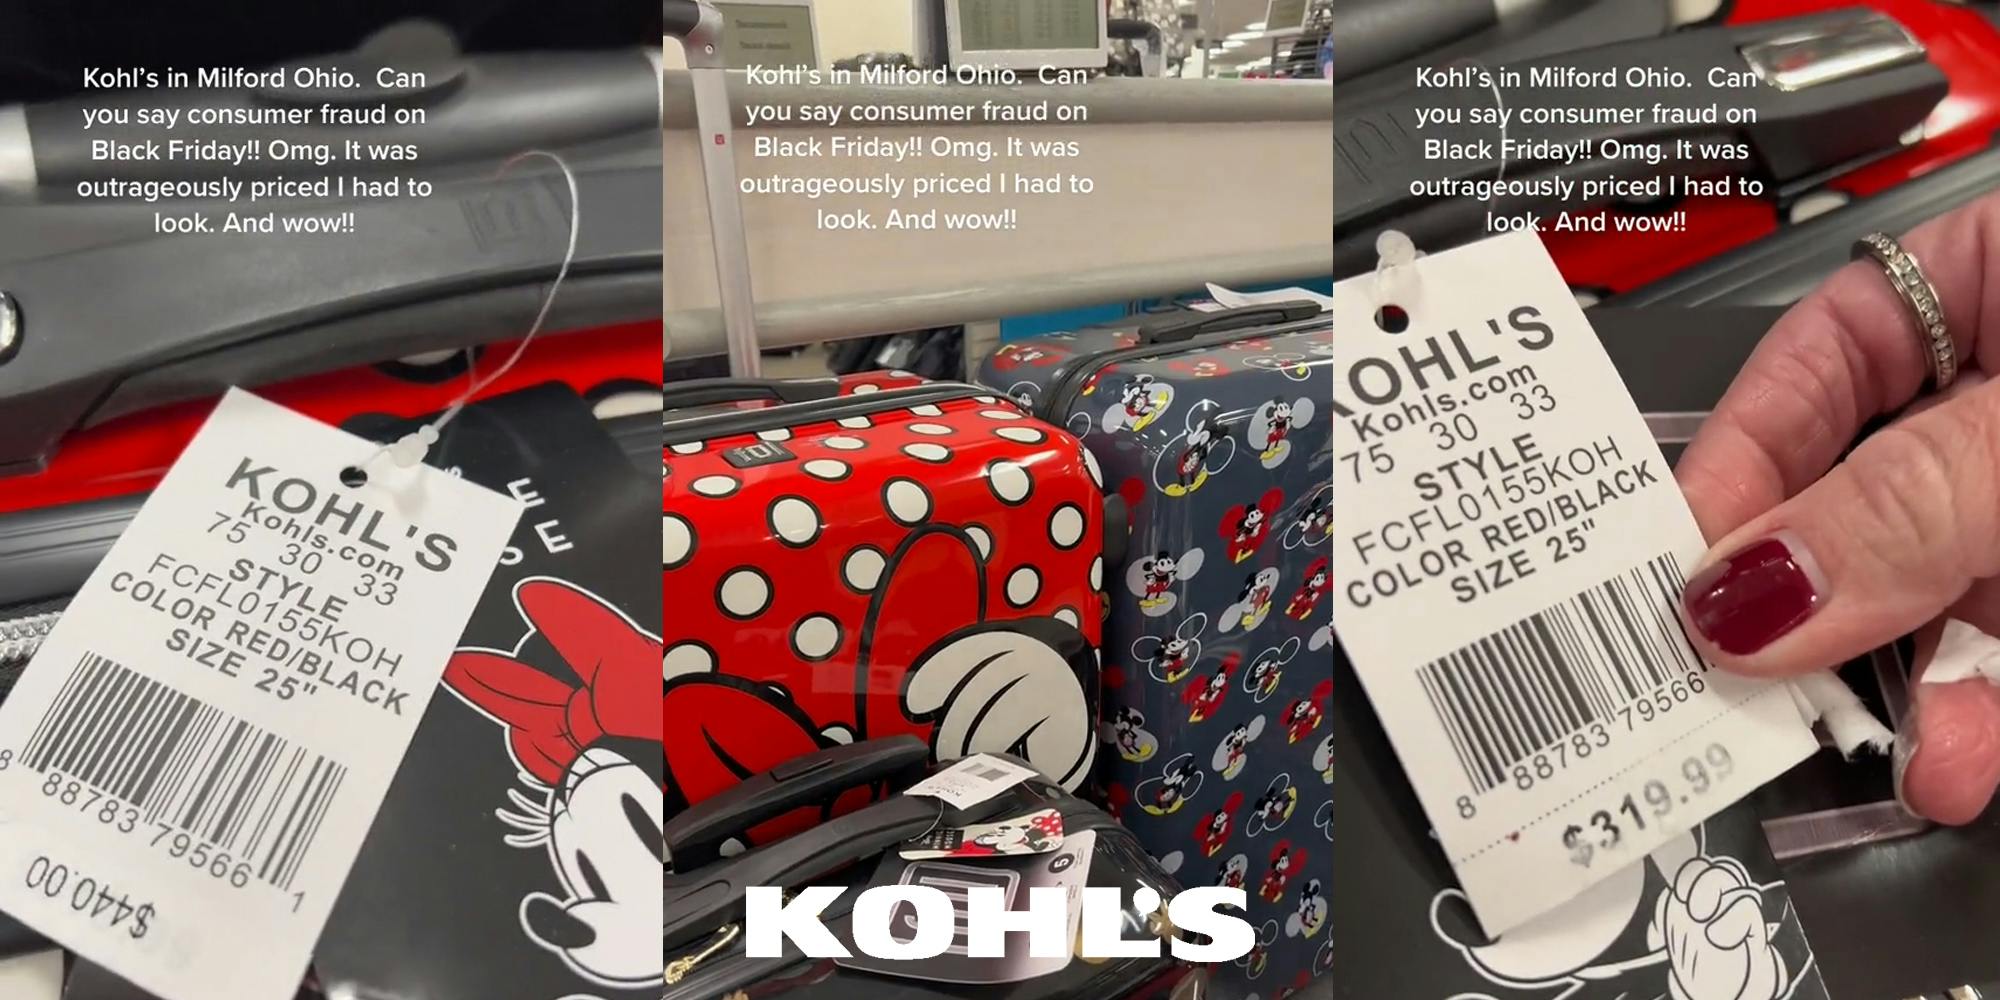 Minnie Mouse luggage bag at Kohl's priced at $440 caption "Kohl's in Milford Ohio. Can you say consumer fraud on Black Friday!! Omg. It was outrageously priced I had to look. And wow!!" (l) Kohl's interior with Minnie Mouse luggage bags and Kohl's logo at bottom caption "Kohl's in Milford Ohio. Can you say consumer fraud on Black Friday!! Omg. It was outrageously priced I had to look. And wow!!" (c) Kohl's Minnie Mouse luggage bag with original price at $319.99 caption "Kohl's in Milford Ohio. Can you say consumer fraud on Black Friday!! Omg. It was outrageously priced I had to look. And wow!!" (r)